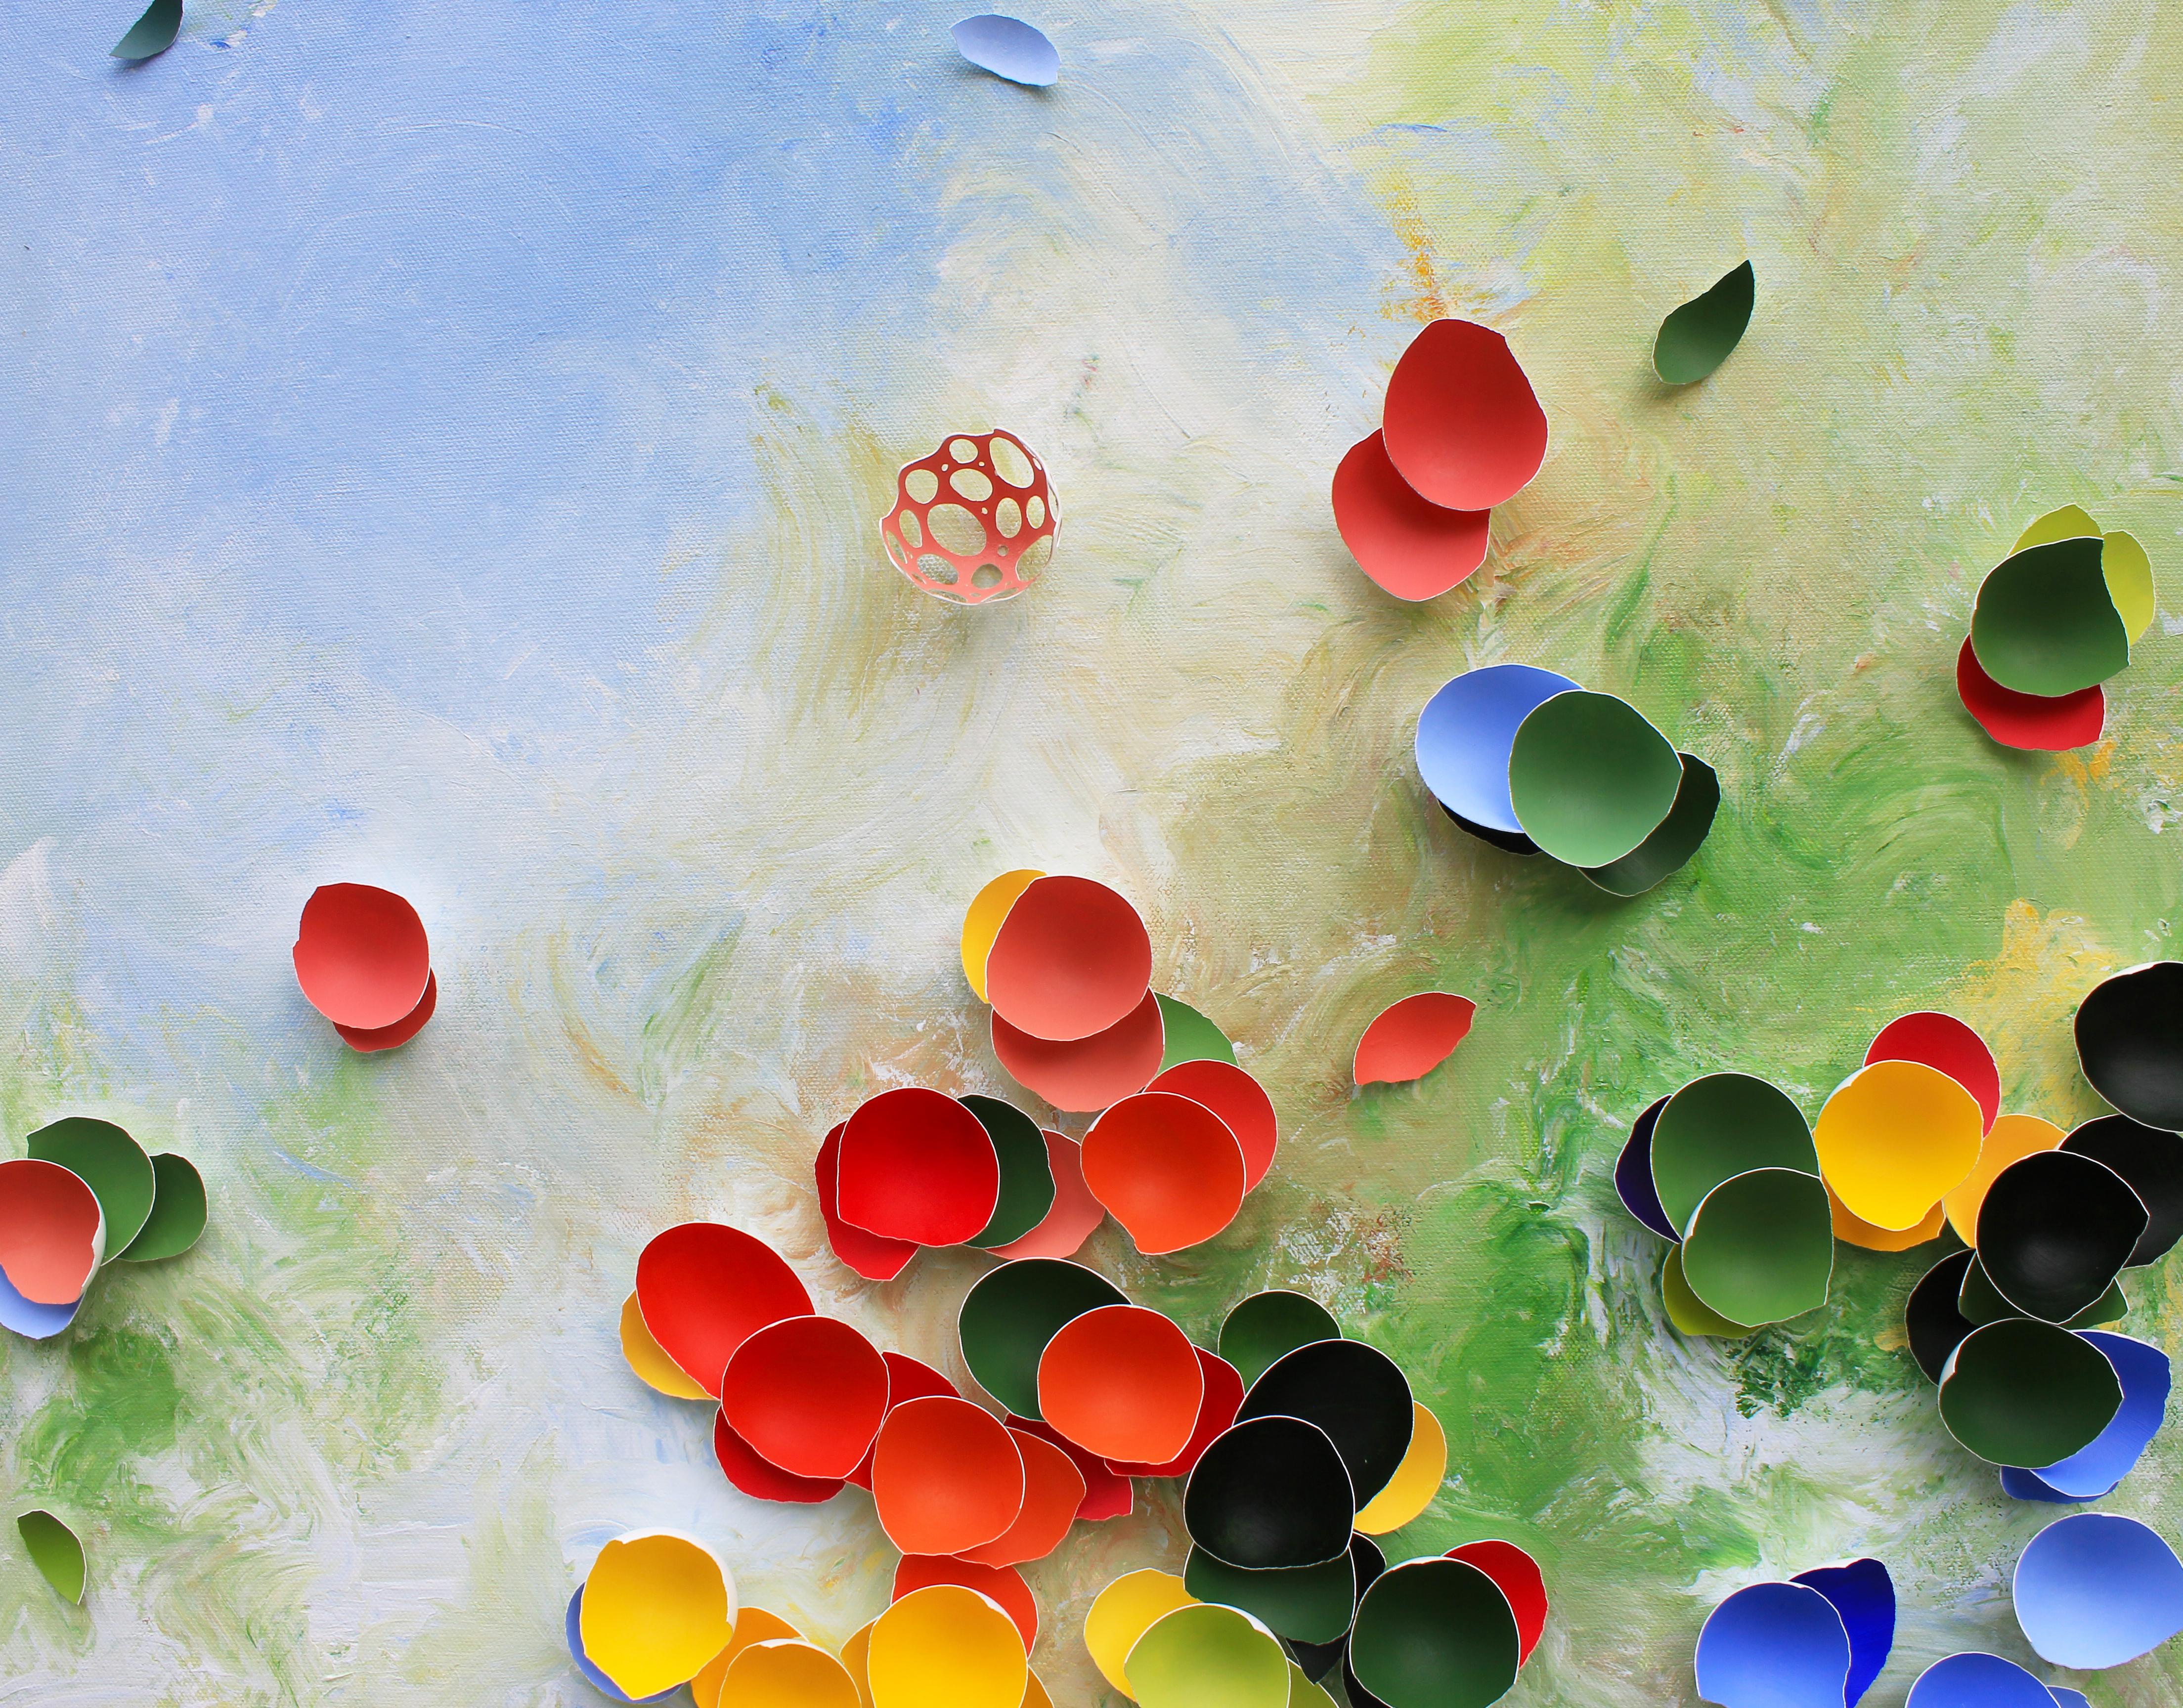 Other Blooming Garden IV by Larisa Safaryan  Acrylic paint and eggshells on canvas